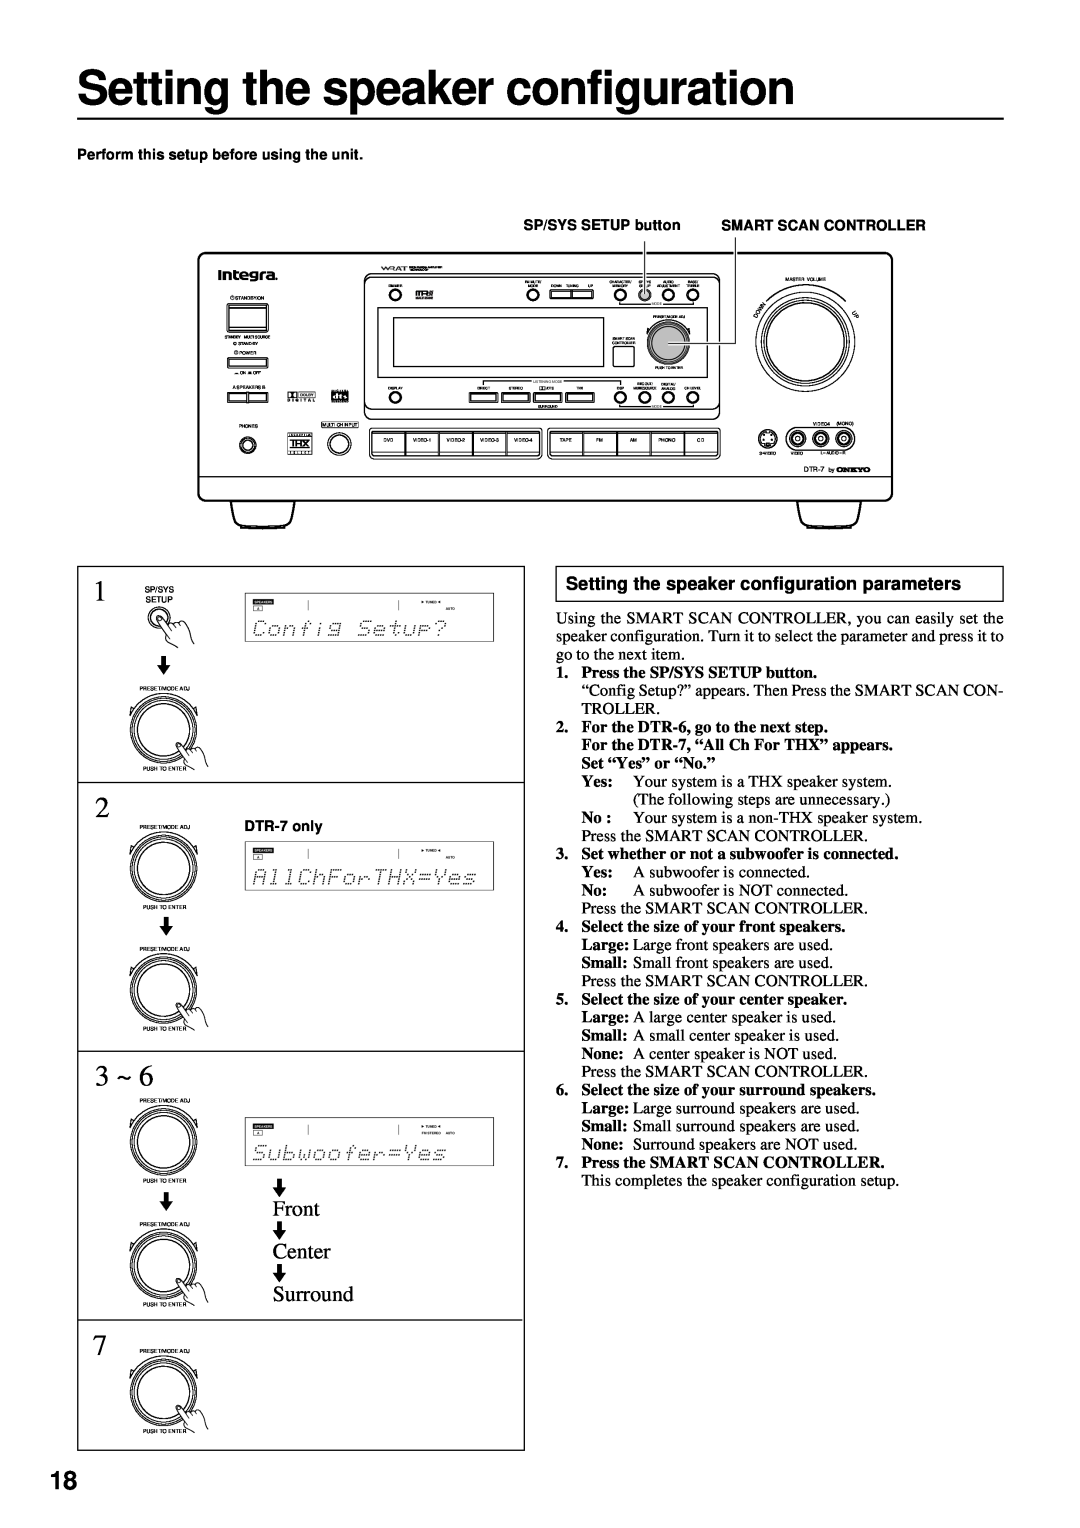 Integra DTR-7 instruction manual Front, Center Surround, Setting the speaker configuration parameters 